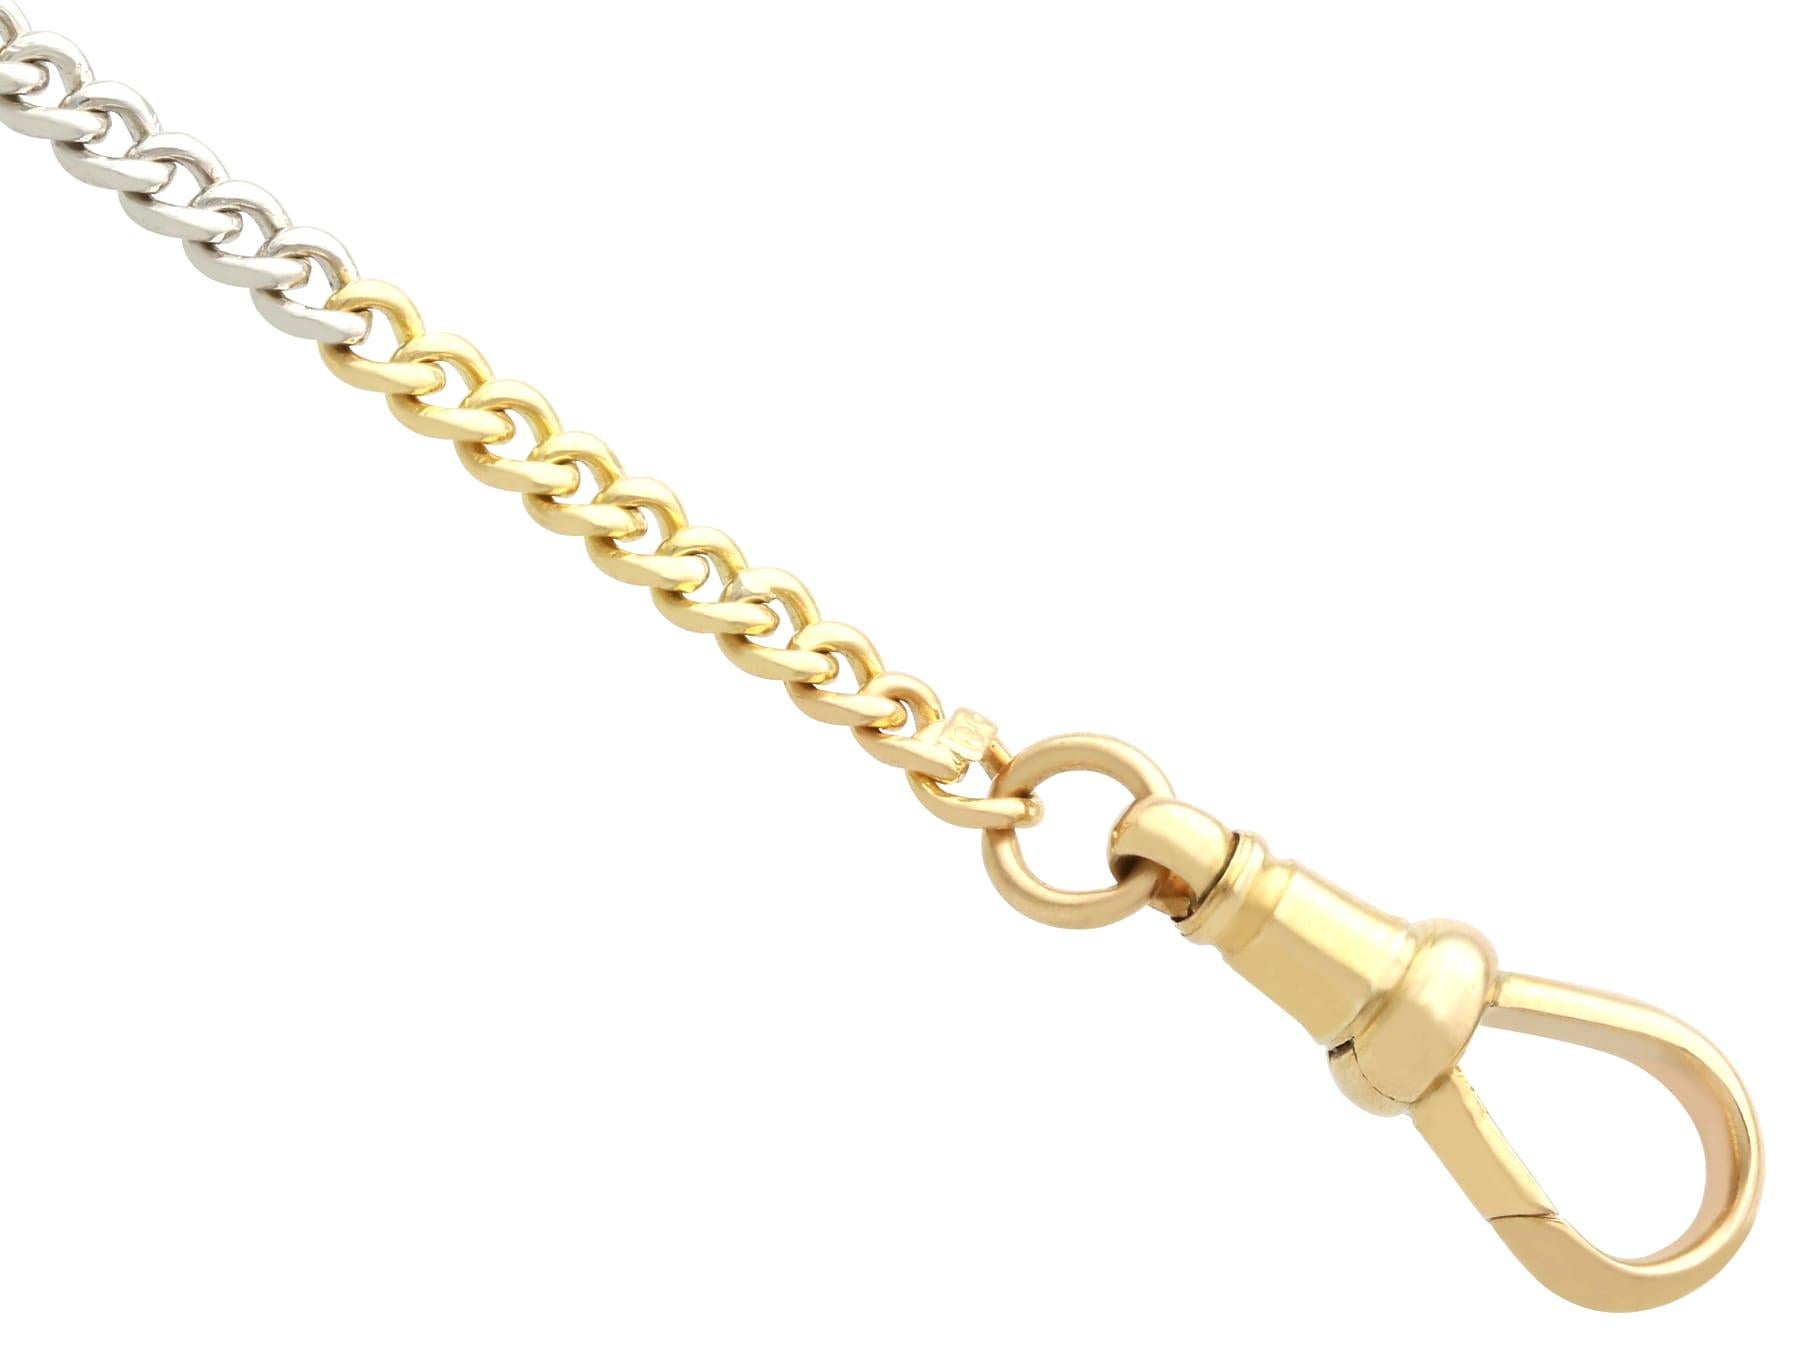 Antique 18k Yellow Gold and Platinum Ladies Fob Watch Chain Circa 1910 In Excellent Condition For Sale In Jesmond, Newcastle Upon Tyne